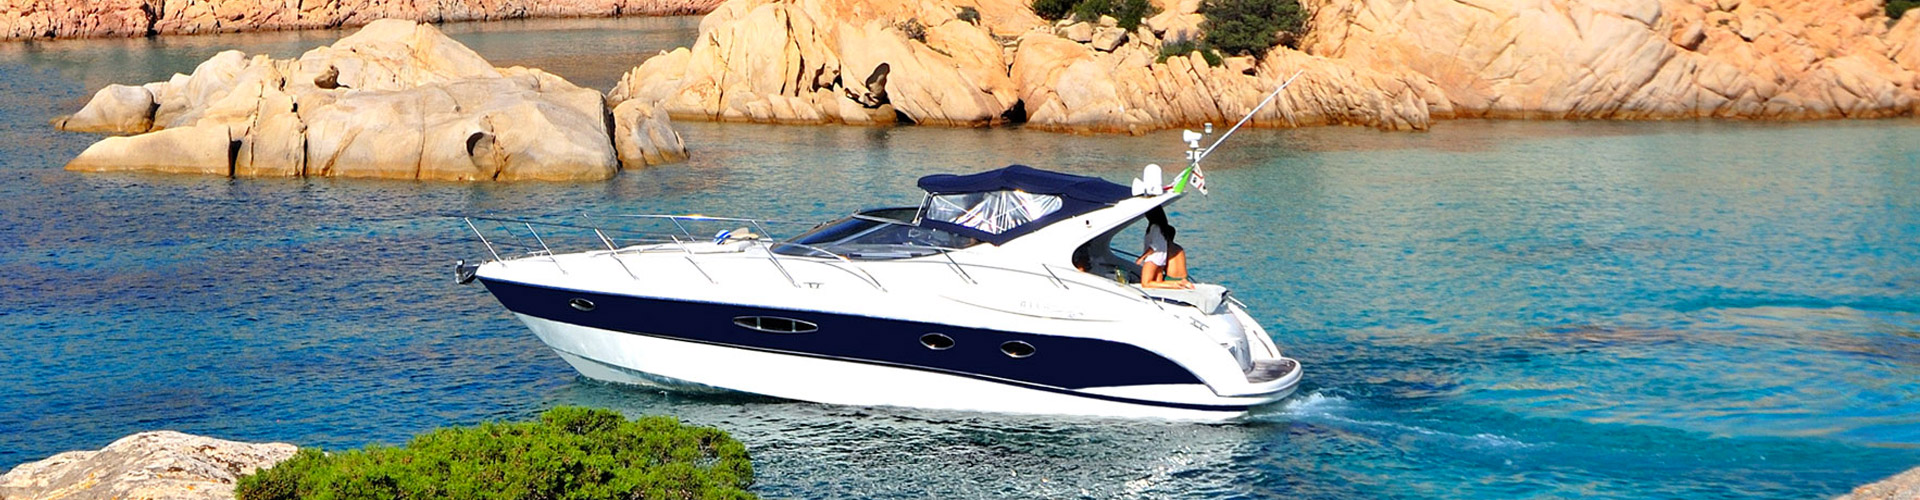 Charter Travel Boat Rent